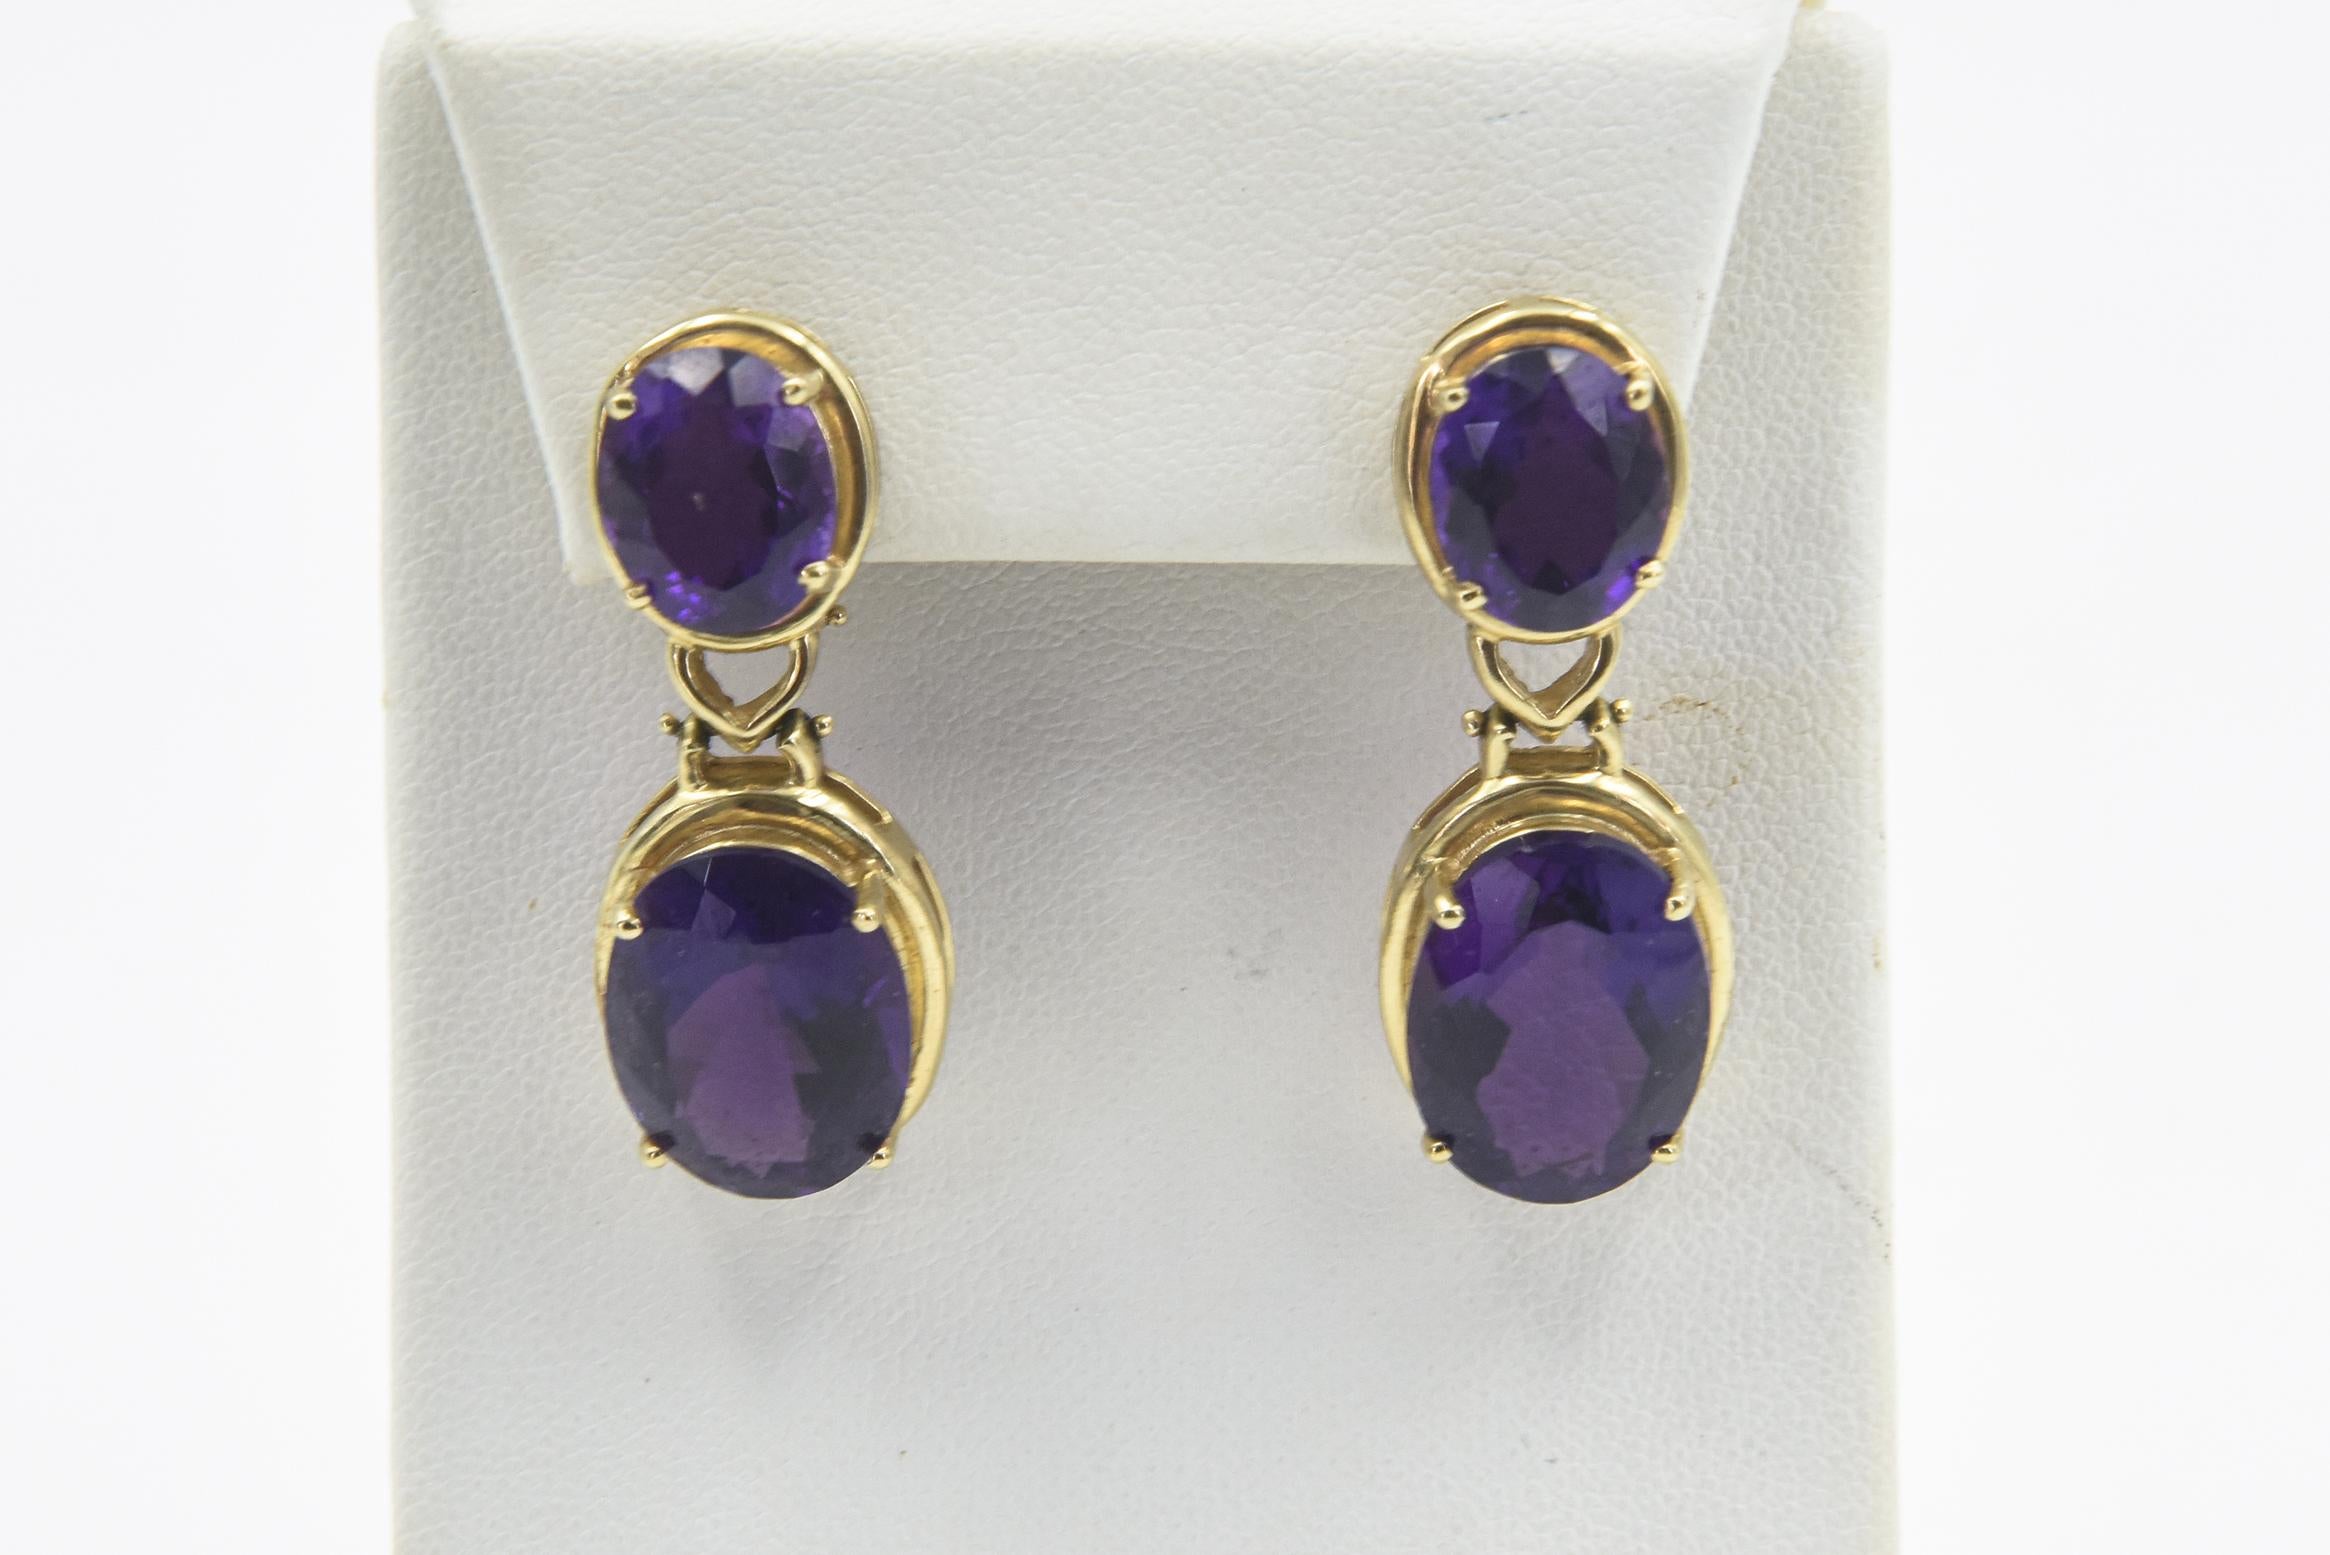 Large faceted gorgeous purple oval amethyst mounted in a 14k yellow gold bezel. The amethyst with out the mounting is approximately 1.95